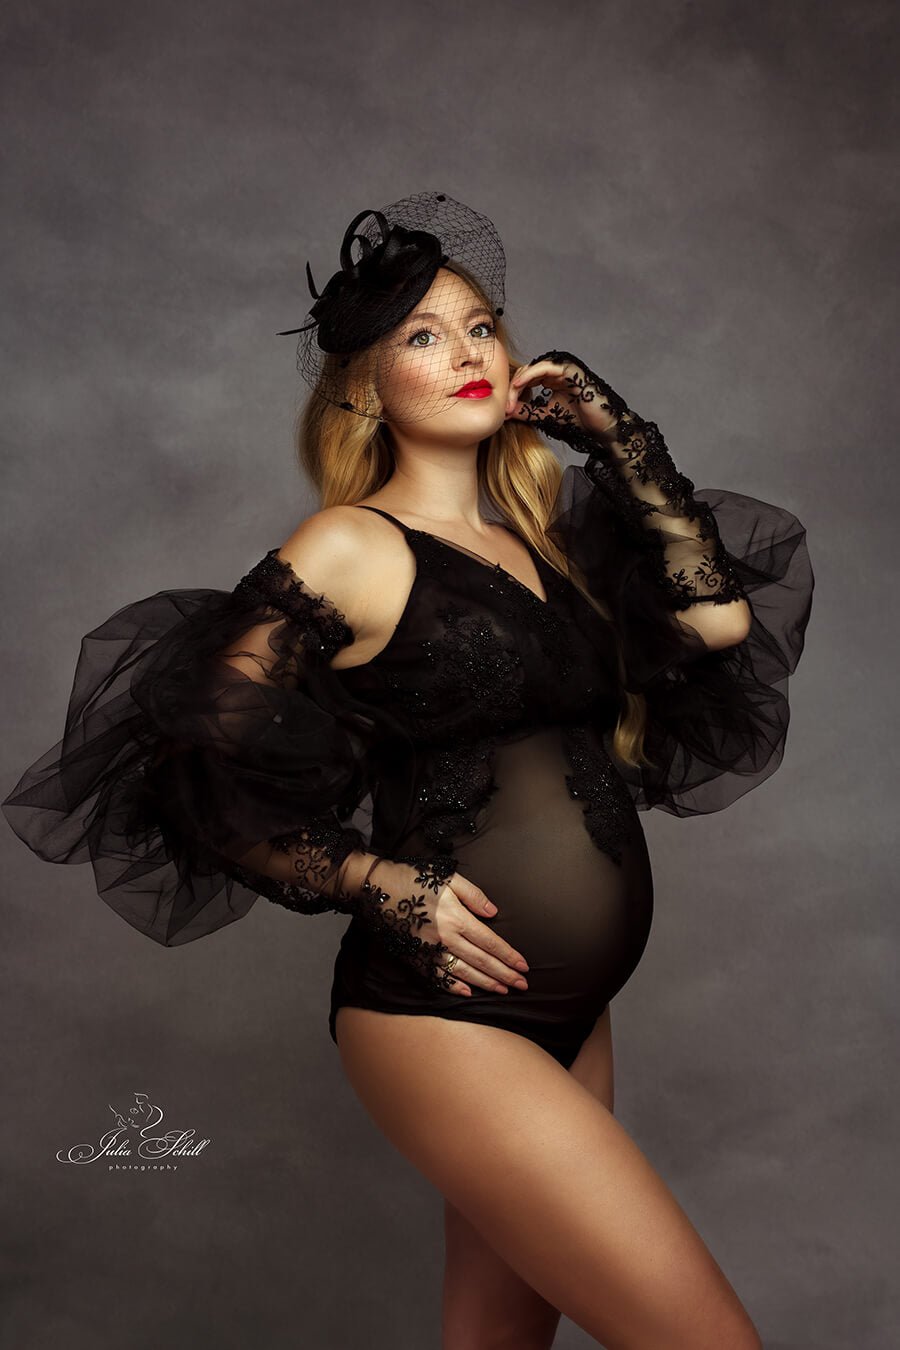 blond pregnant model poses in a studio wearing a special black bodysuit with 3d bridal lace. the bodysuit features tulle bishop sleeves and gloves. the model has a black piece on her head. 